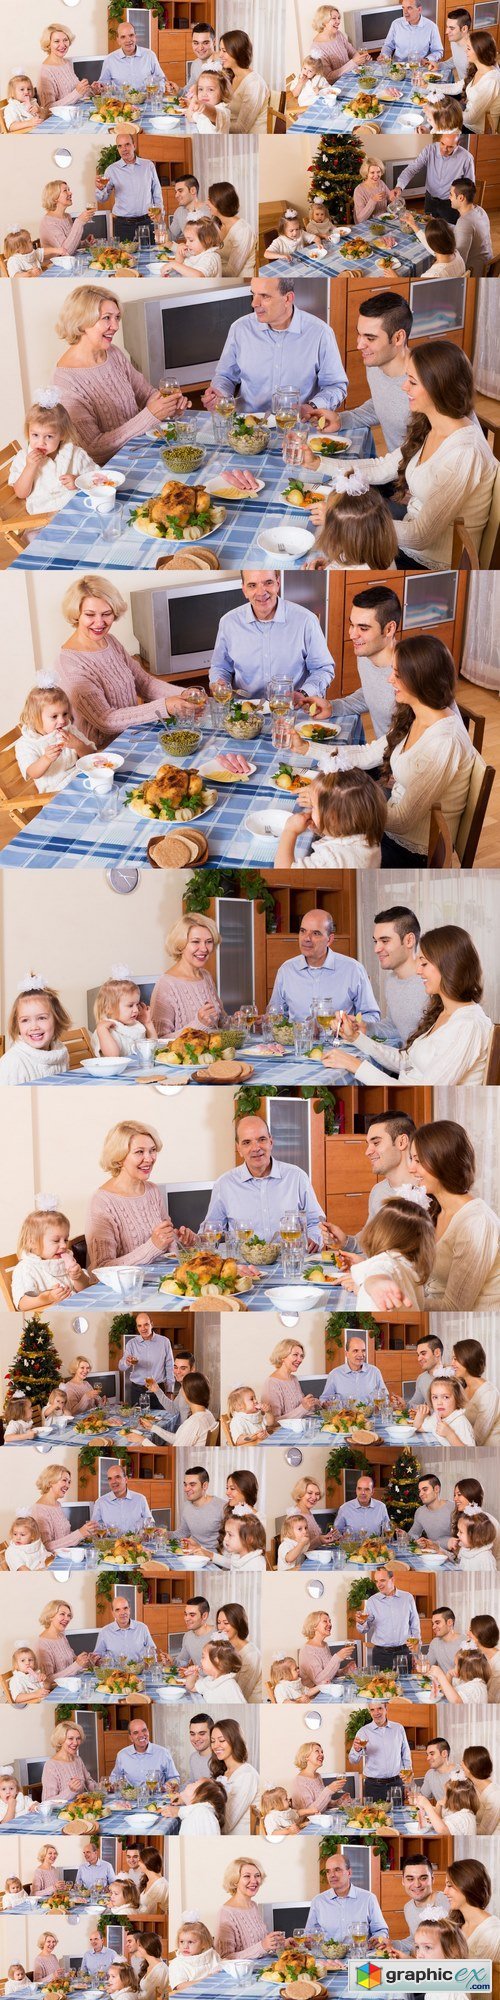 Family sitting at table for dinner